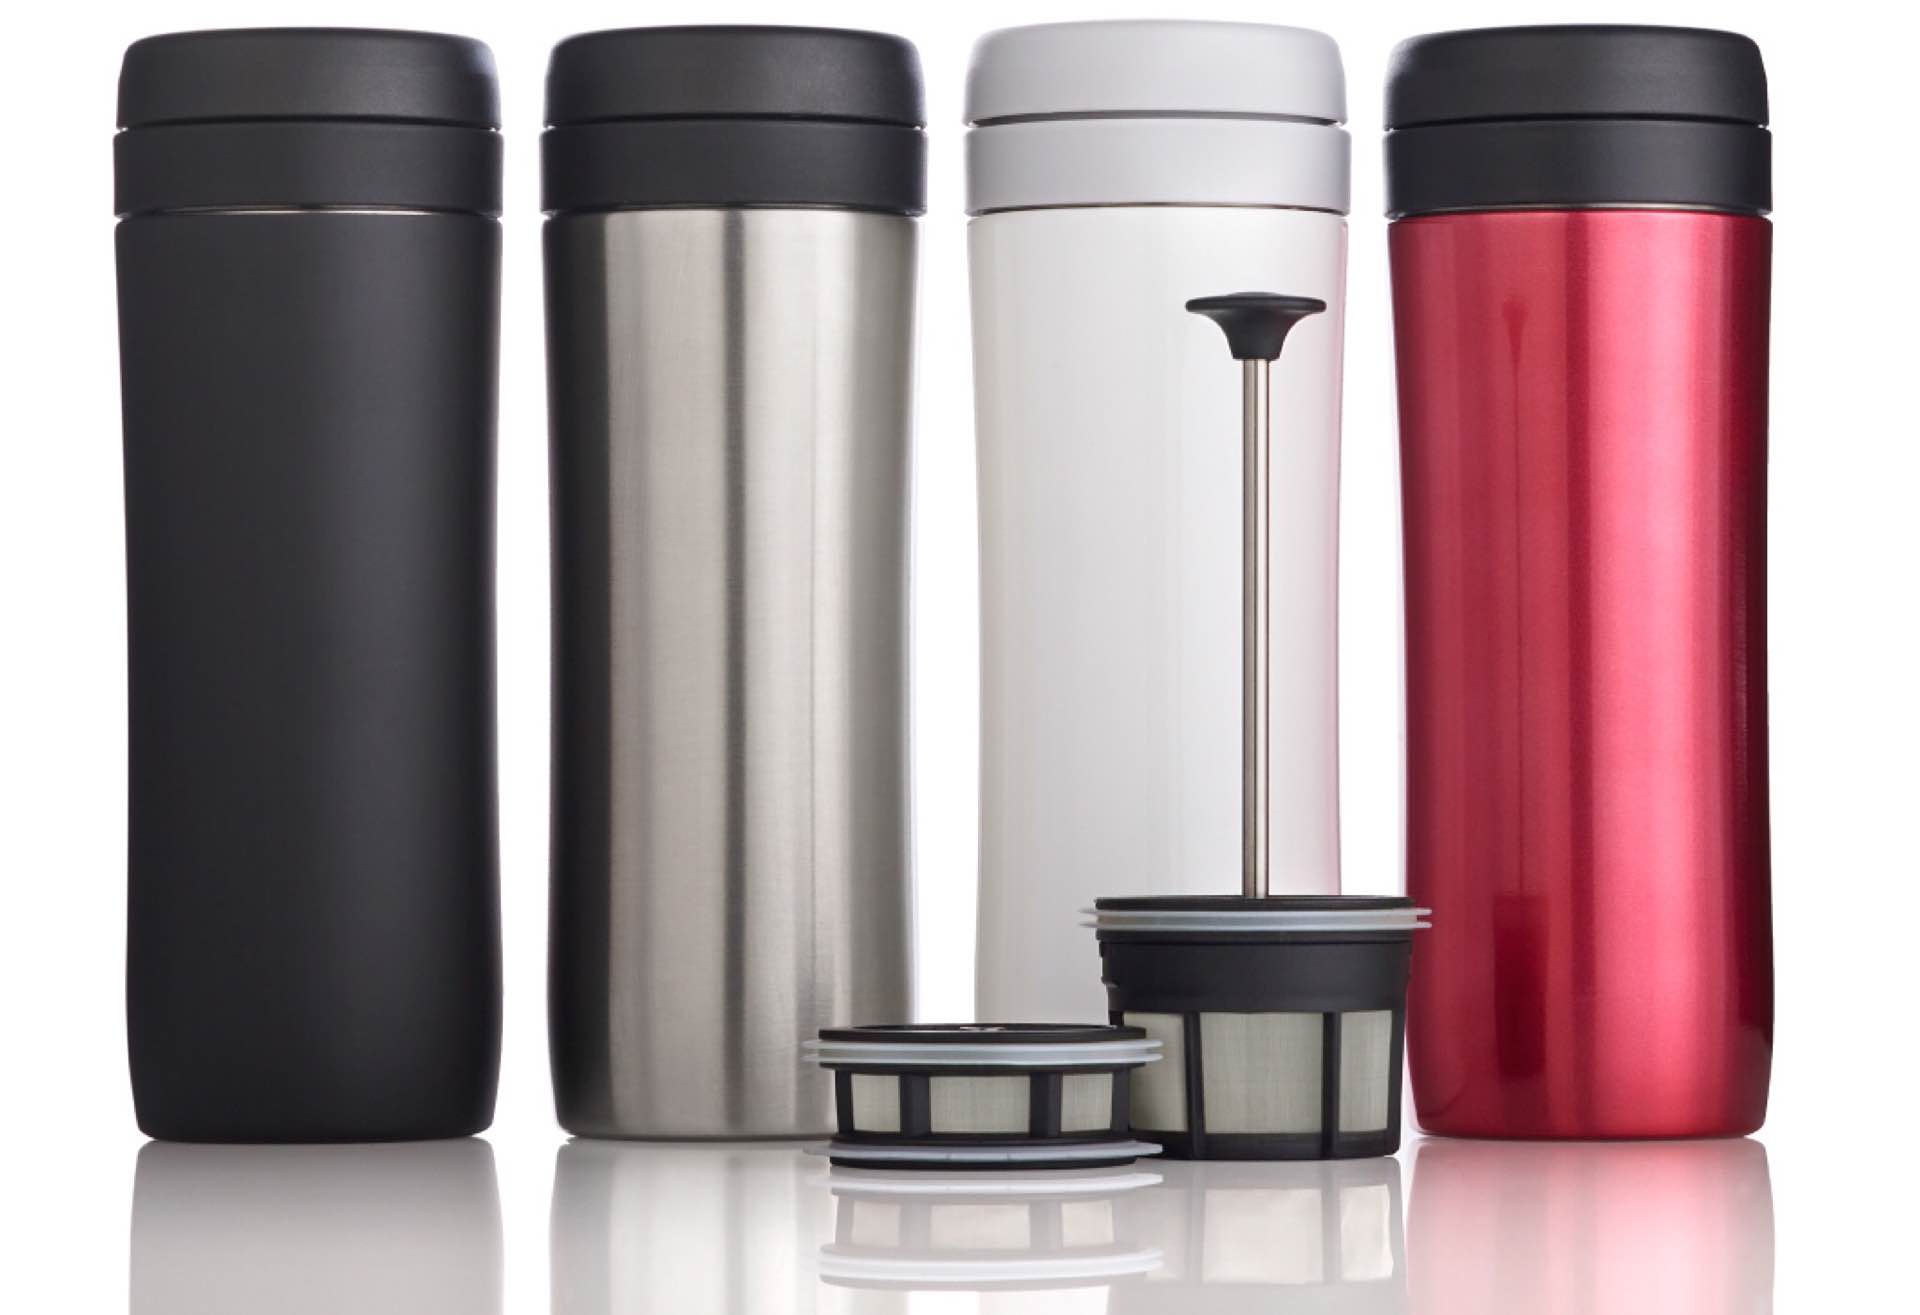 Espro's Coffee Travel Press. ($27–$33, depending on color)